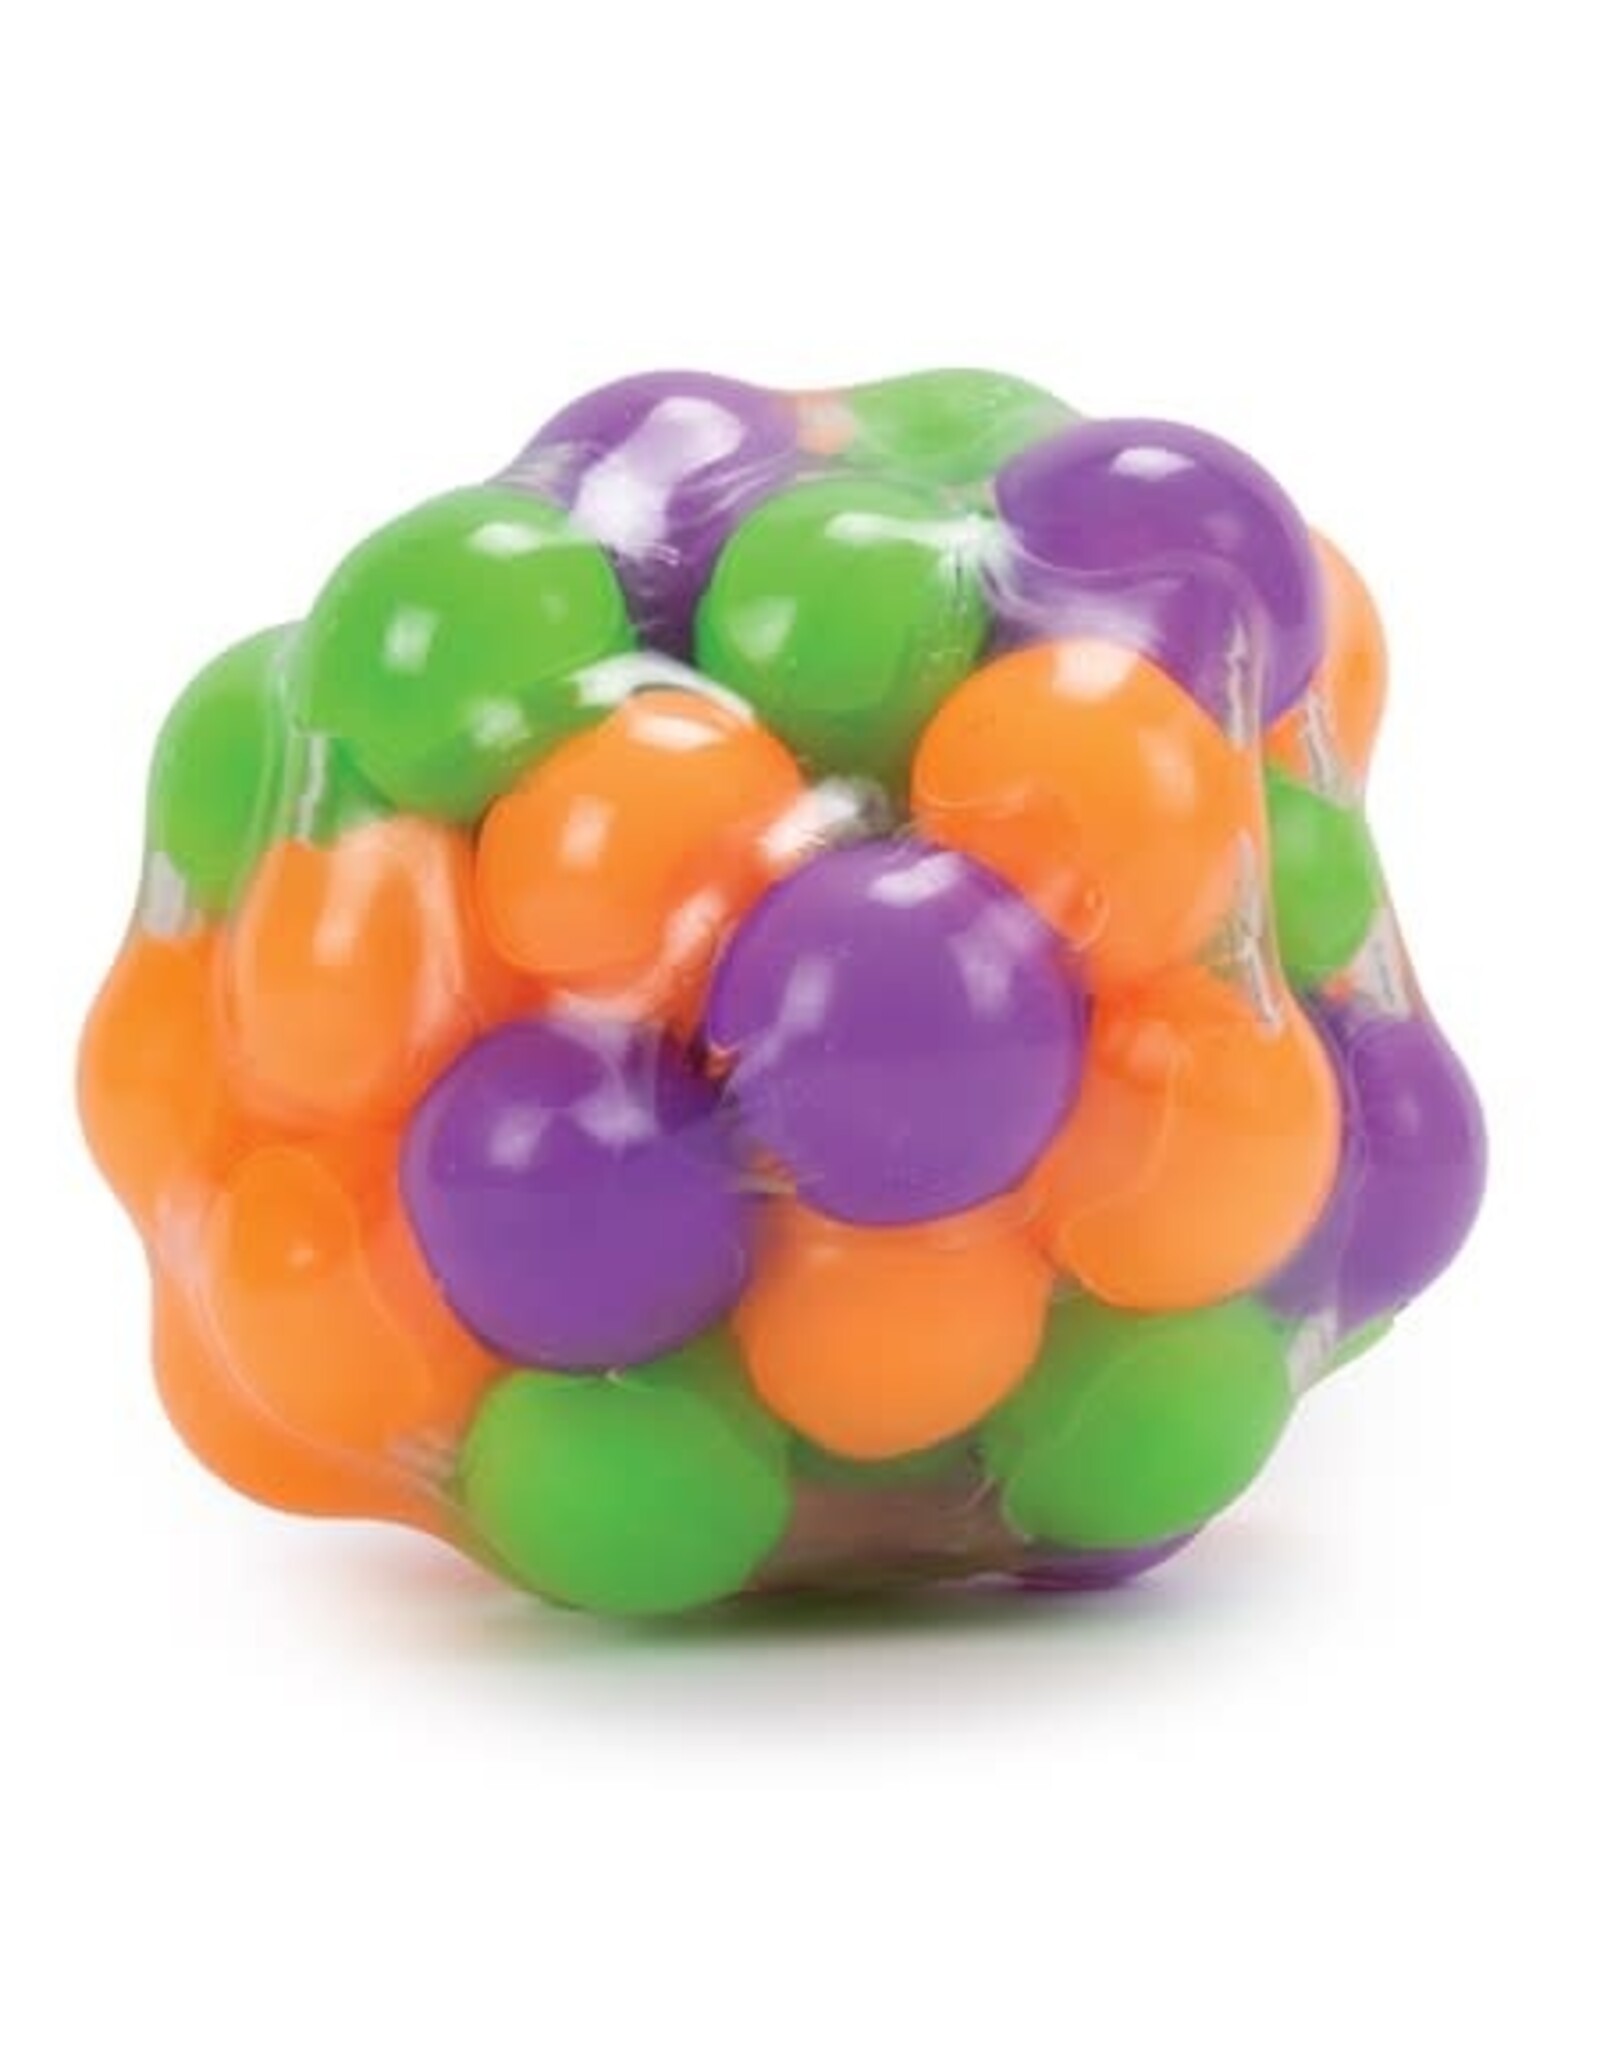 Play Visions Giant Molecule Madness Odd Ball